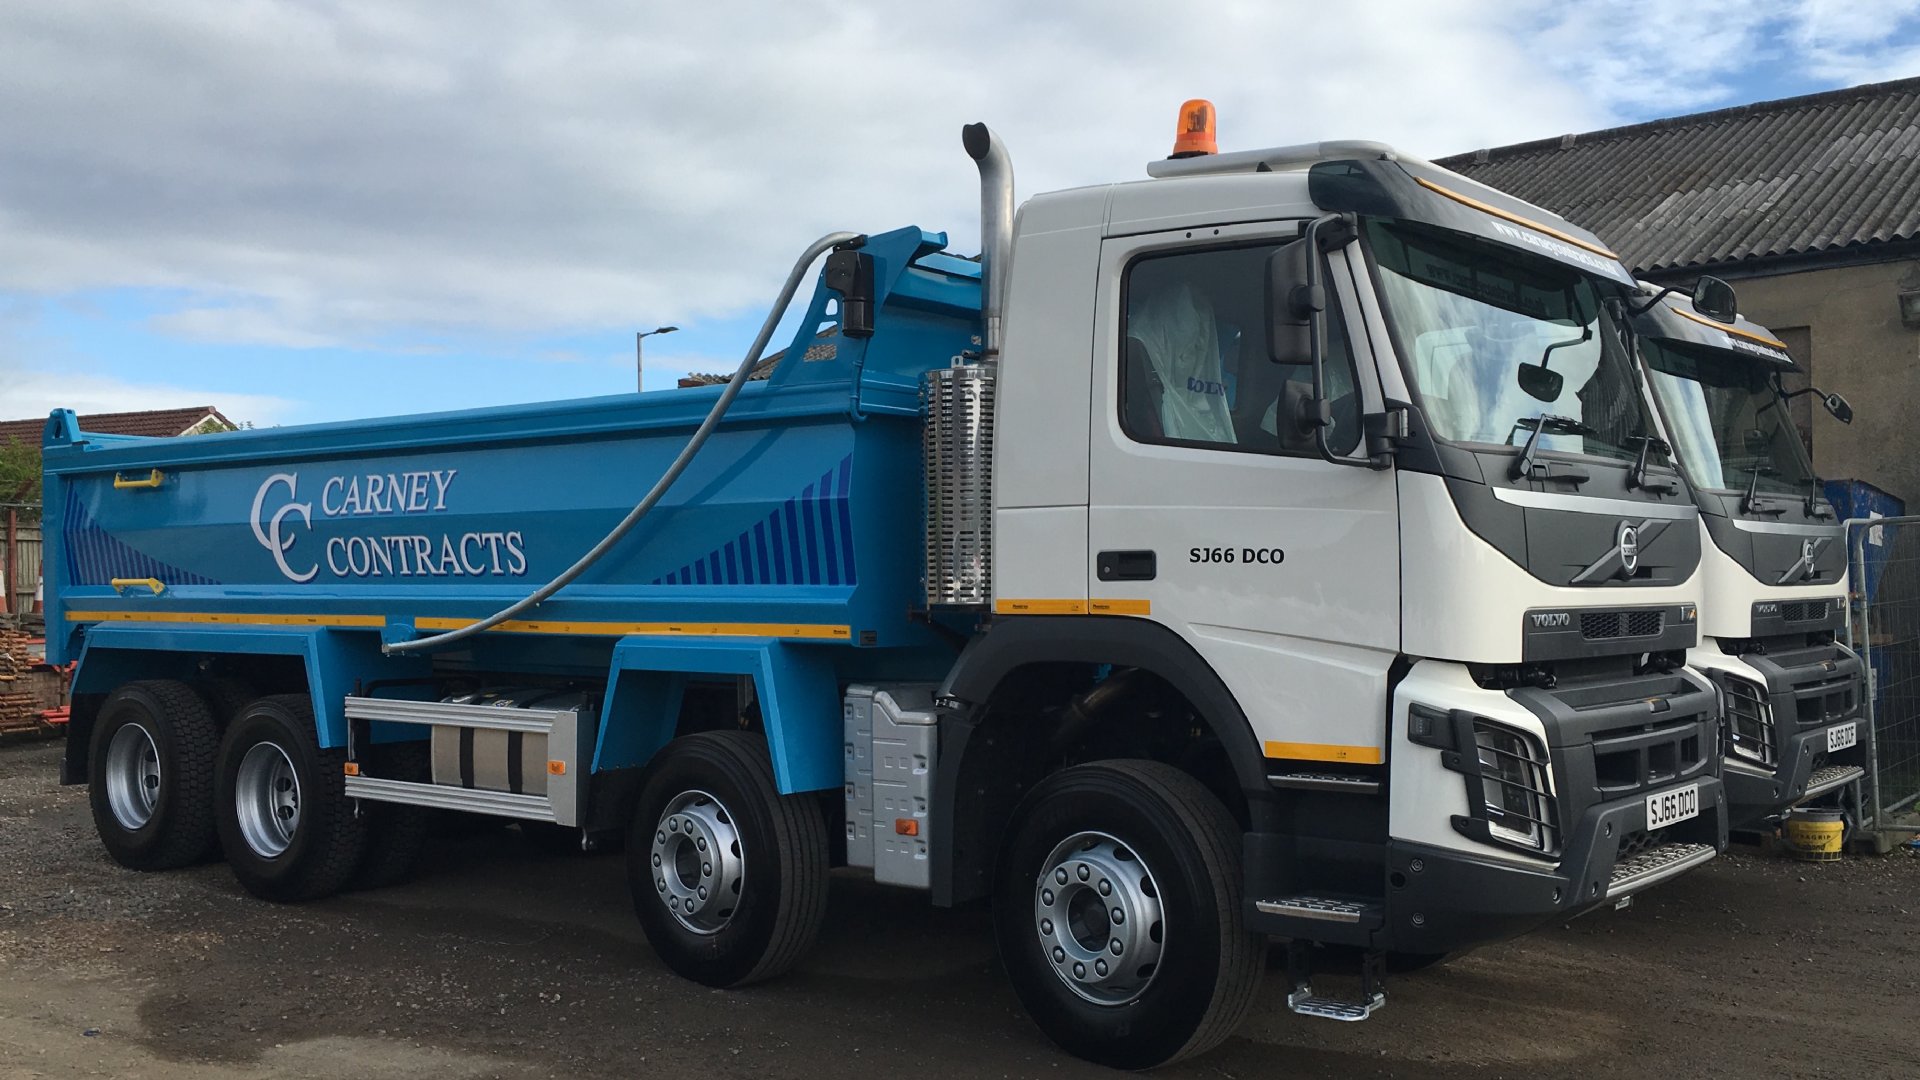 New Acquisitions for our haulage division